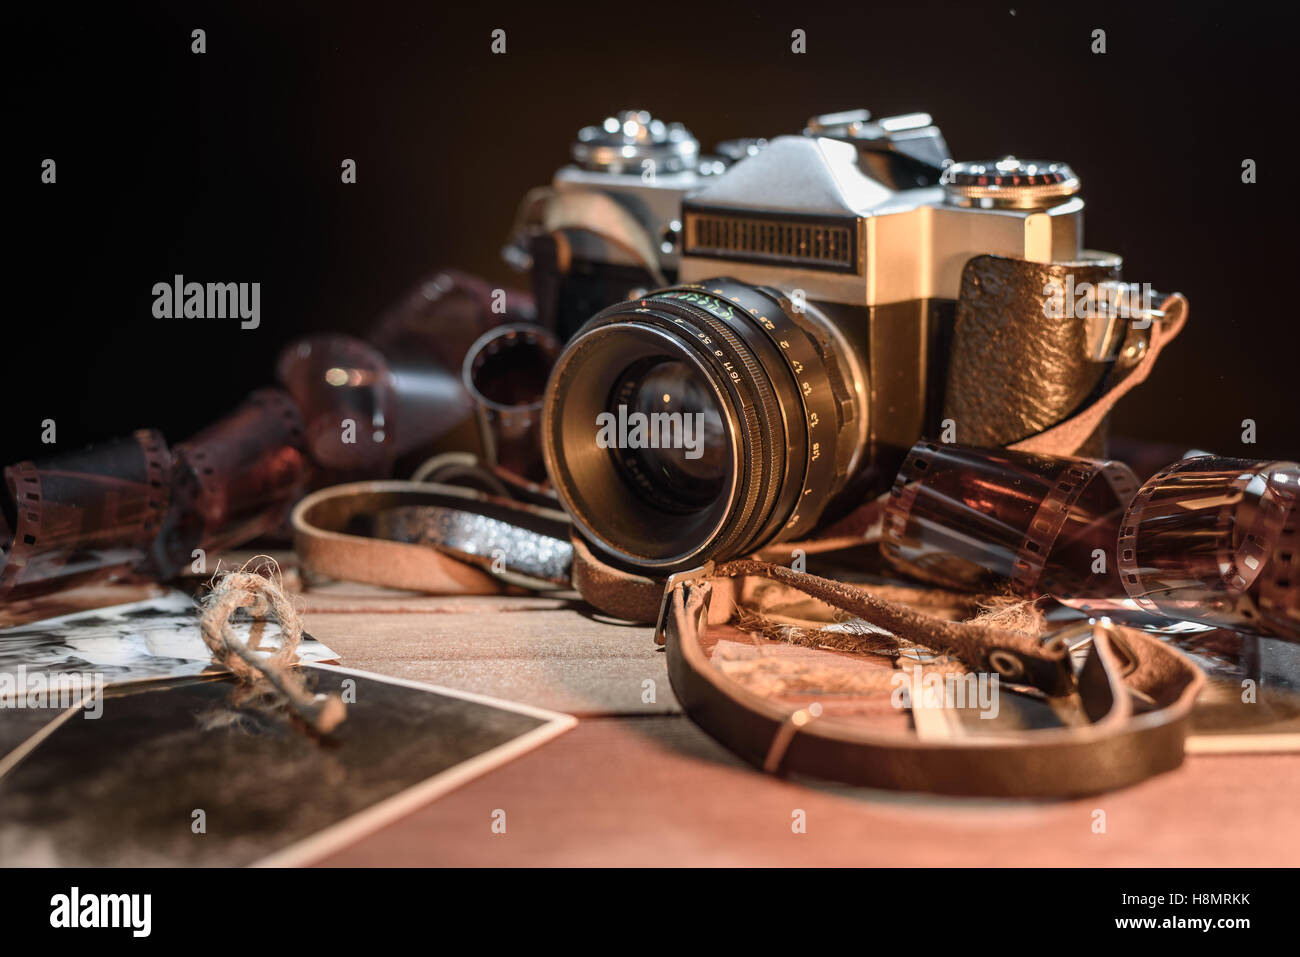 Old retro vintage camera, photos and film on a dark background Stock Photo